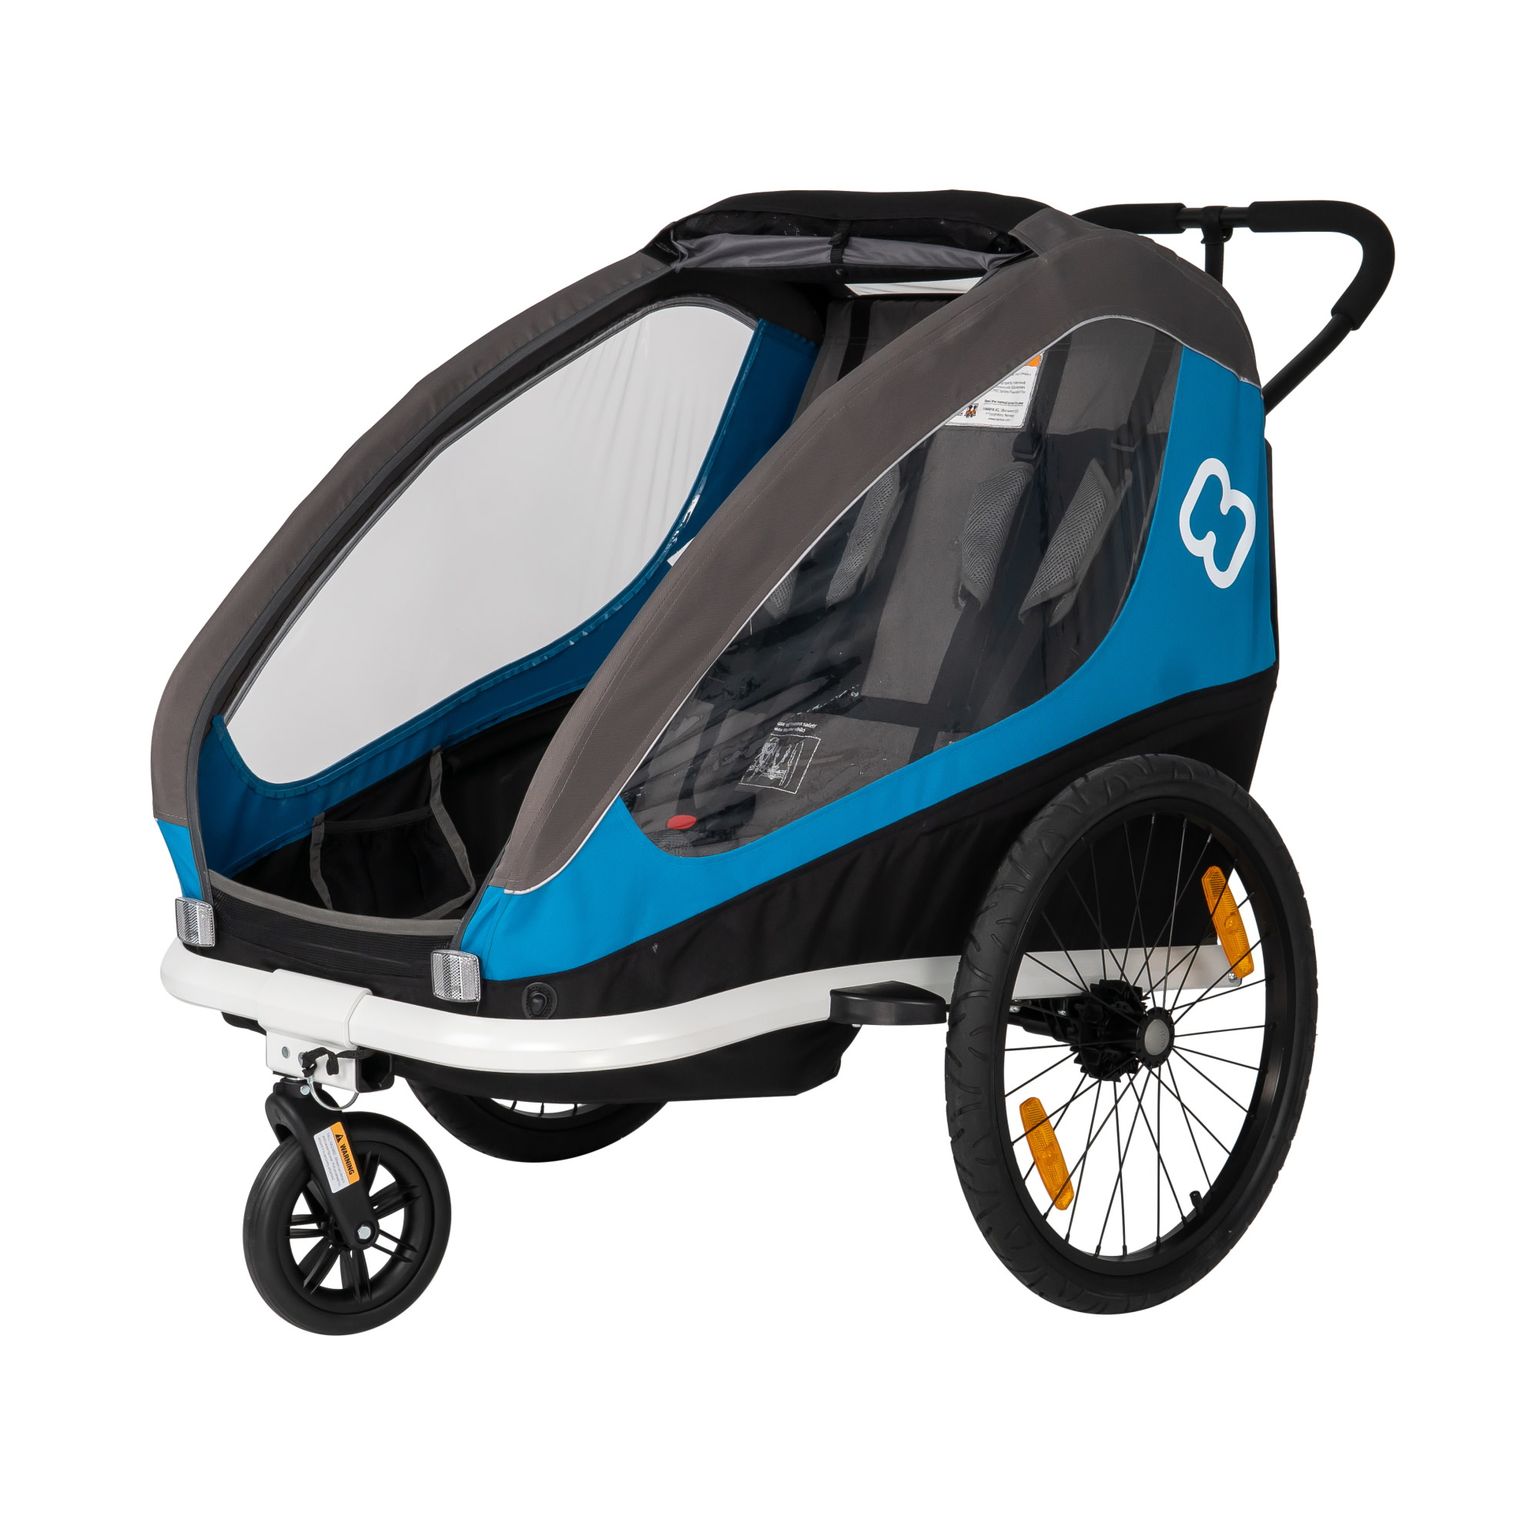 Traveller incl. Bicycle Arm & Stroller Blue/grey